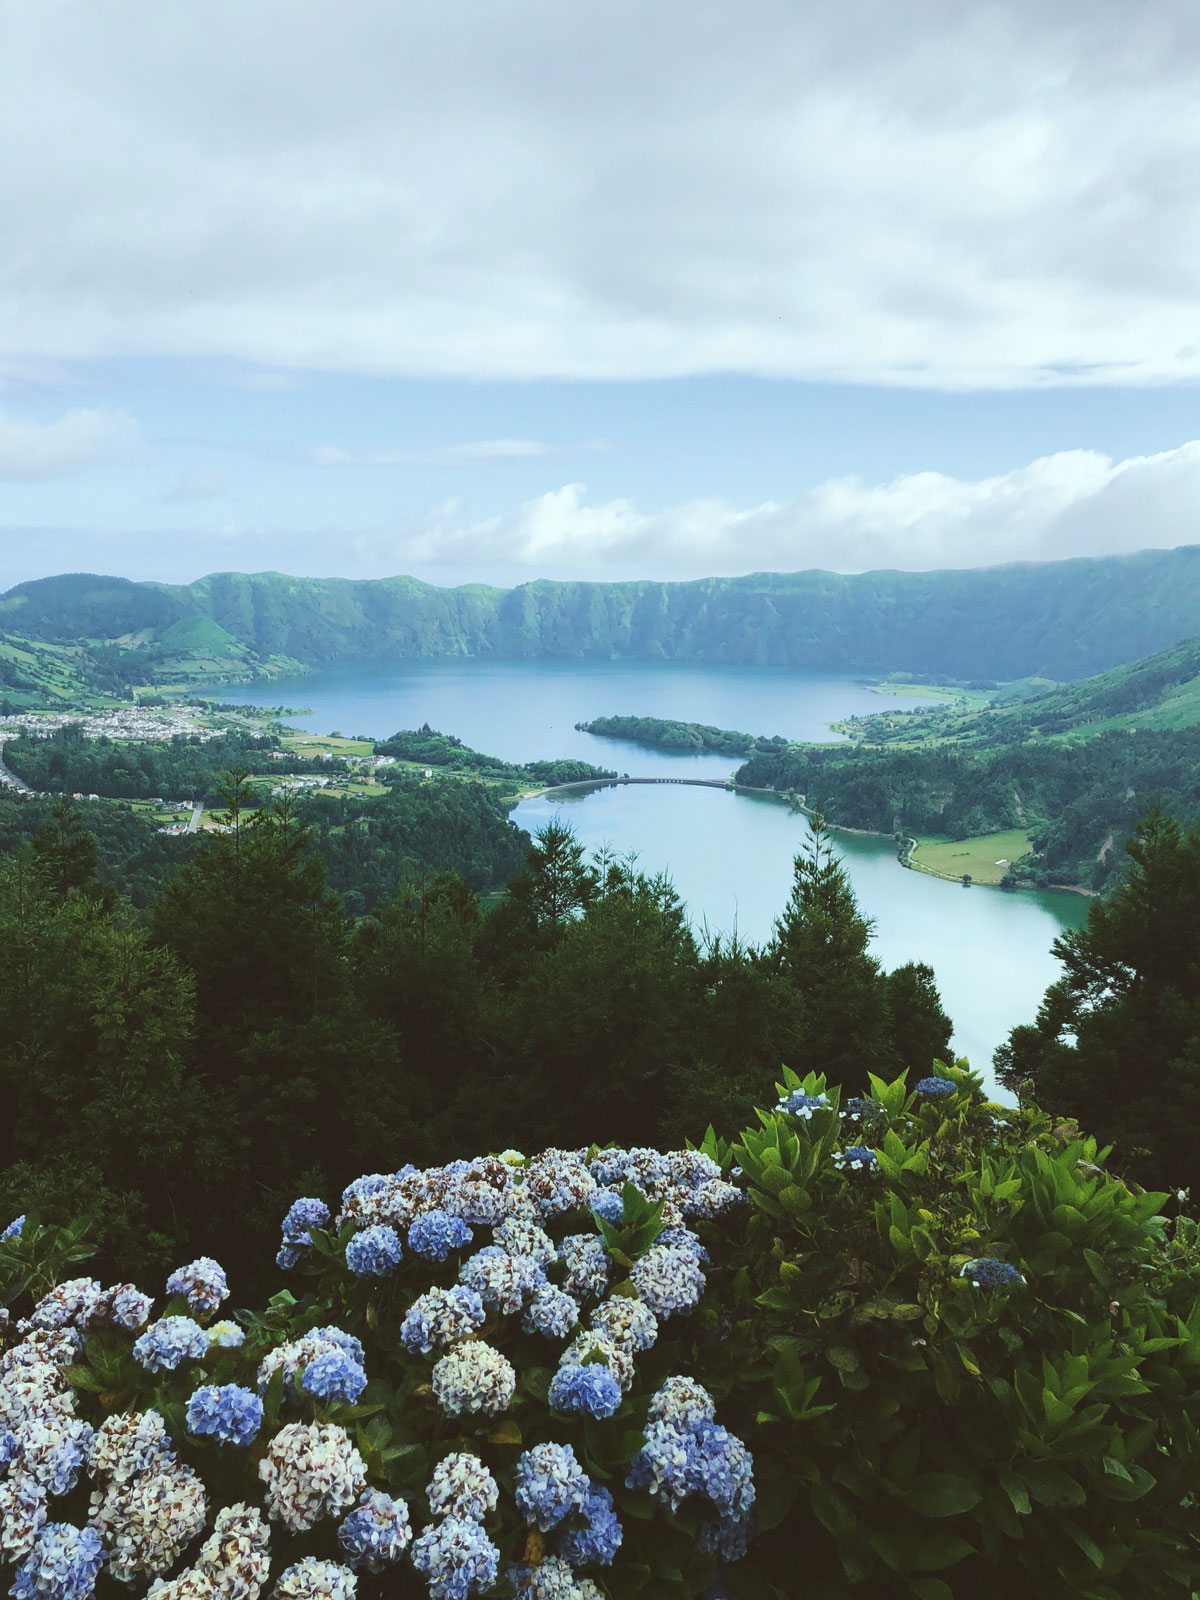 Heritage of The Azores Islands: A Vacation in Paradise